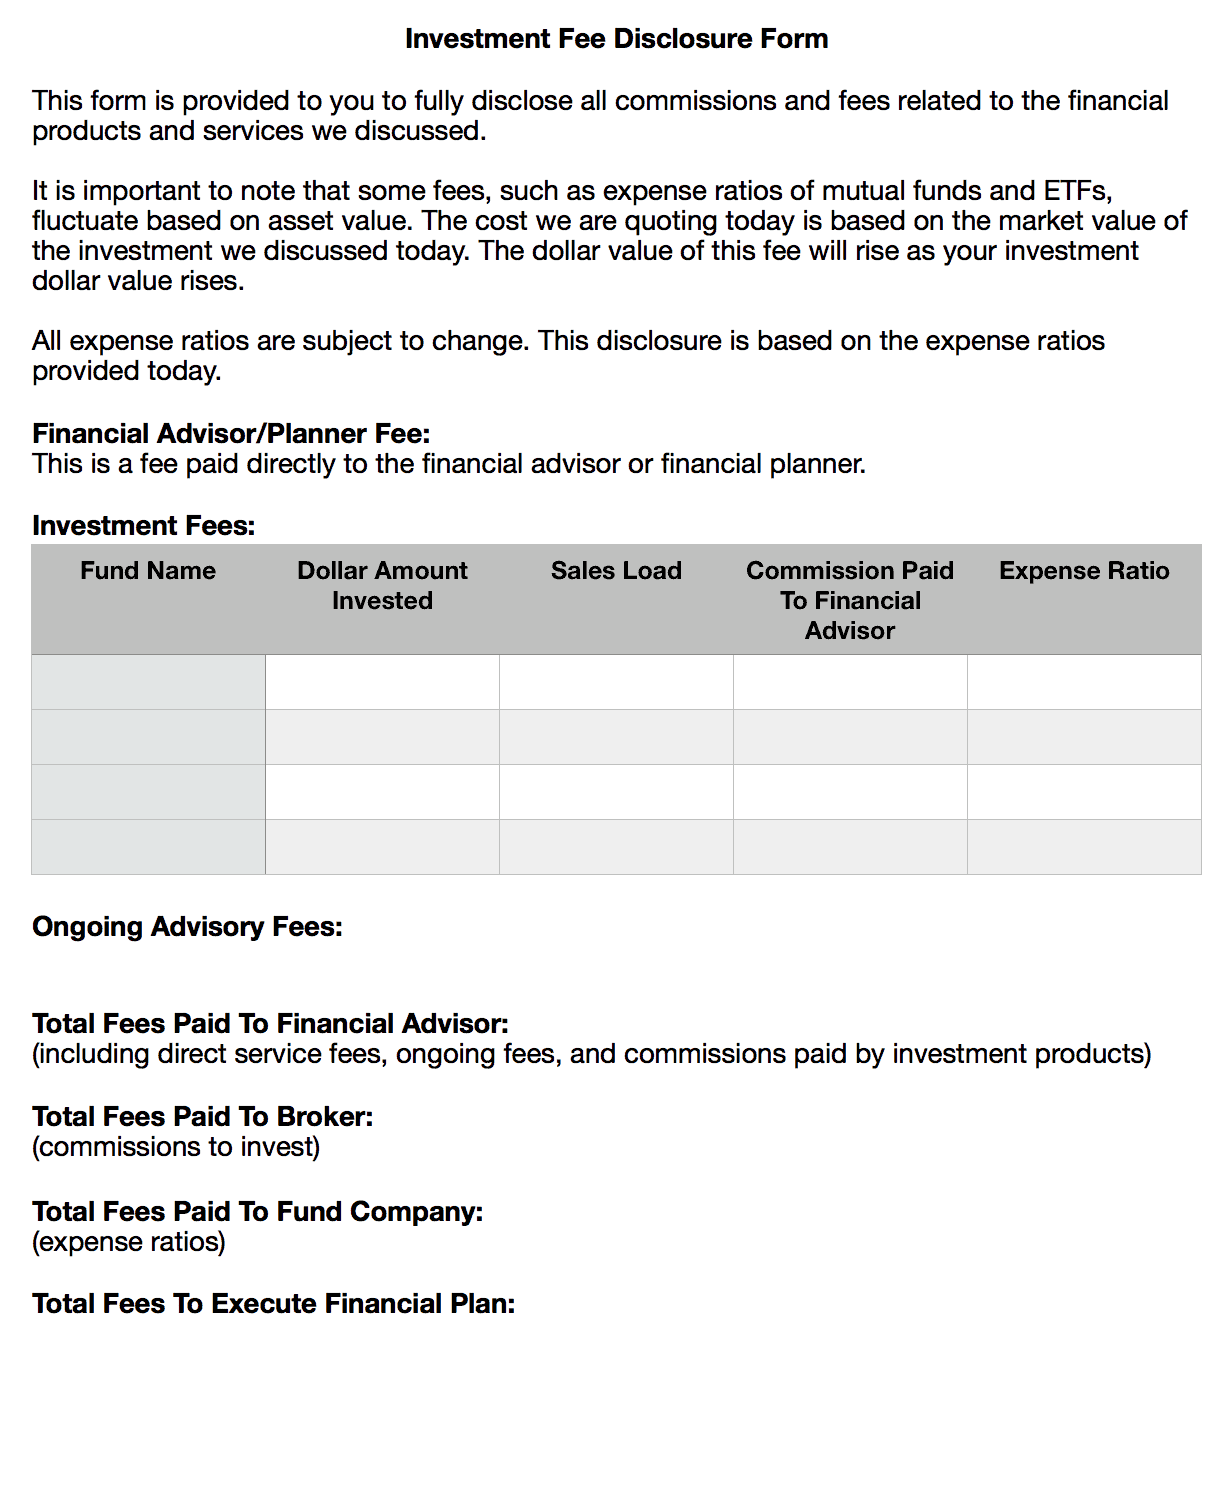 Investment Fee Disclosure Form